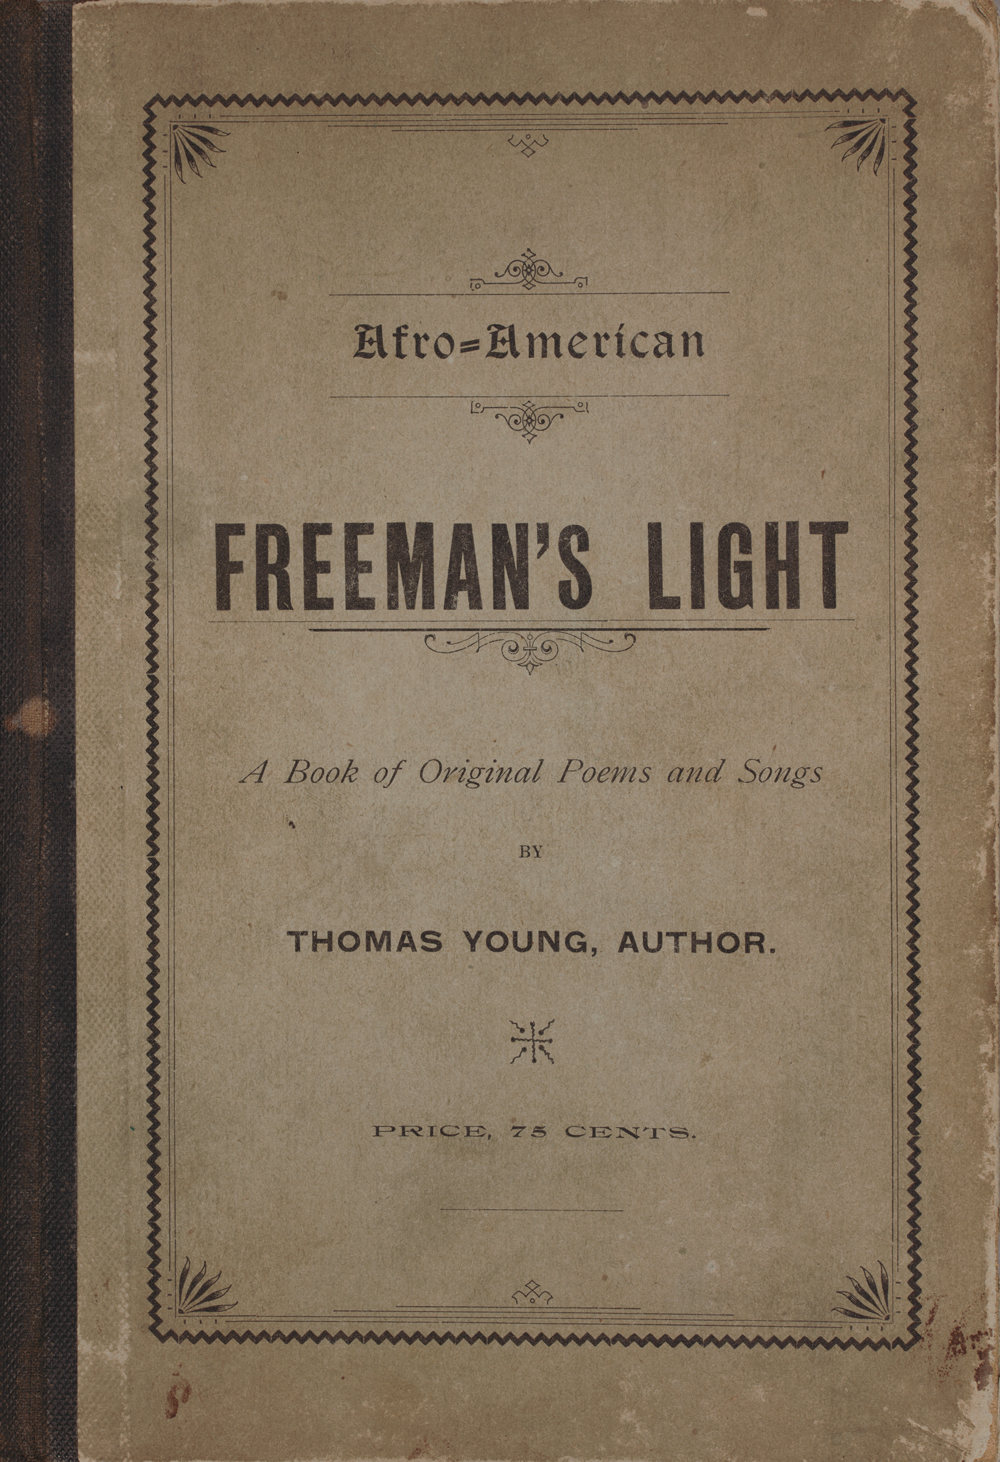 A book cover that reads "Afro-American, Freeman's Light, A Book of Original Poems and Songs" by Thomas Young, Author